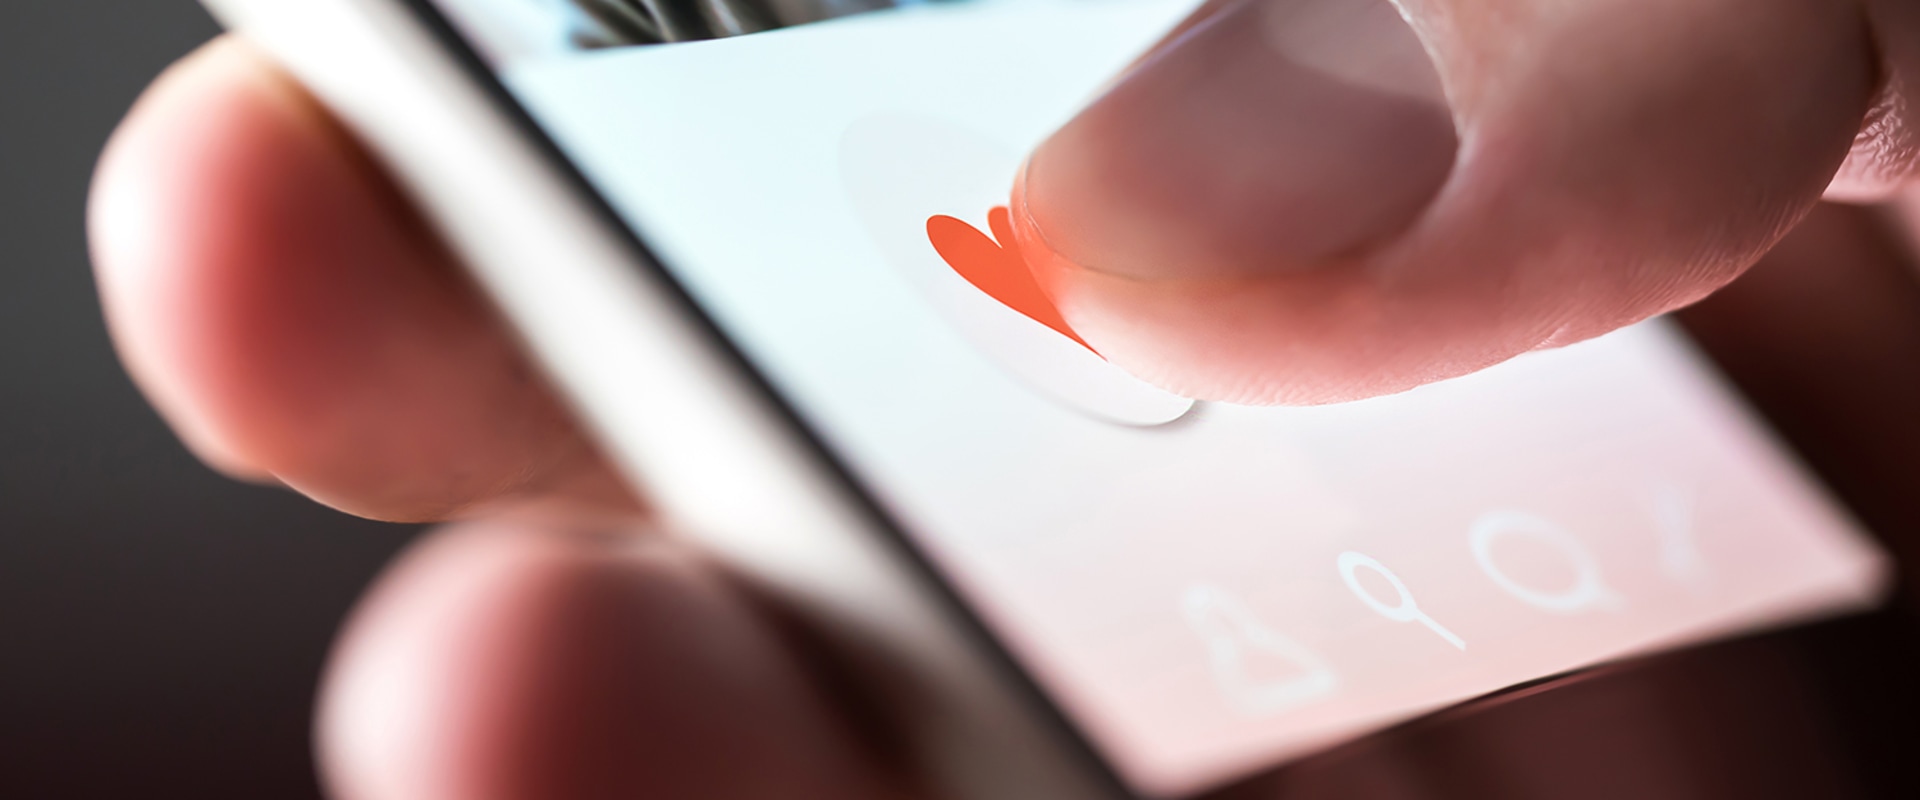 How to Find Love When Dating Apps Don't Work